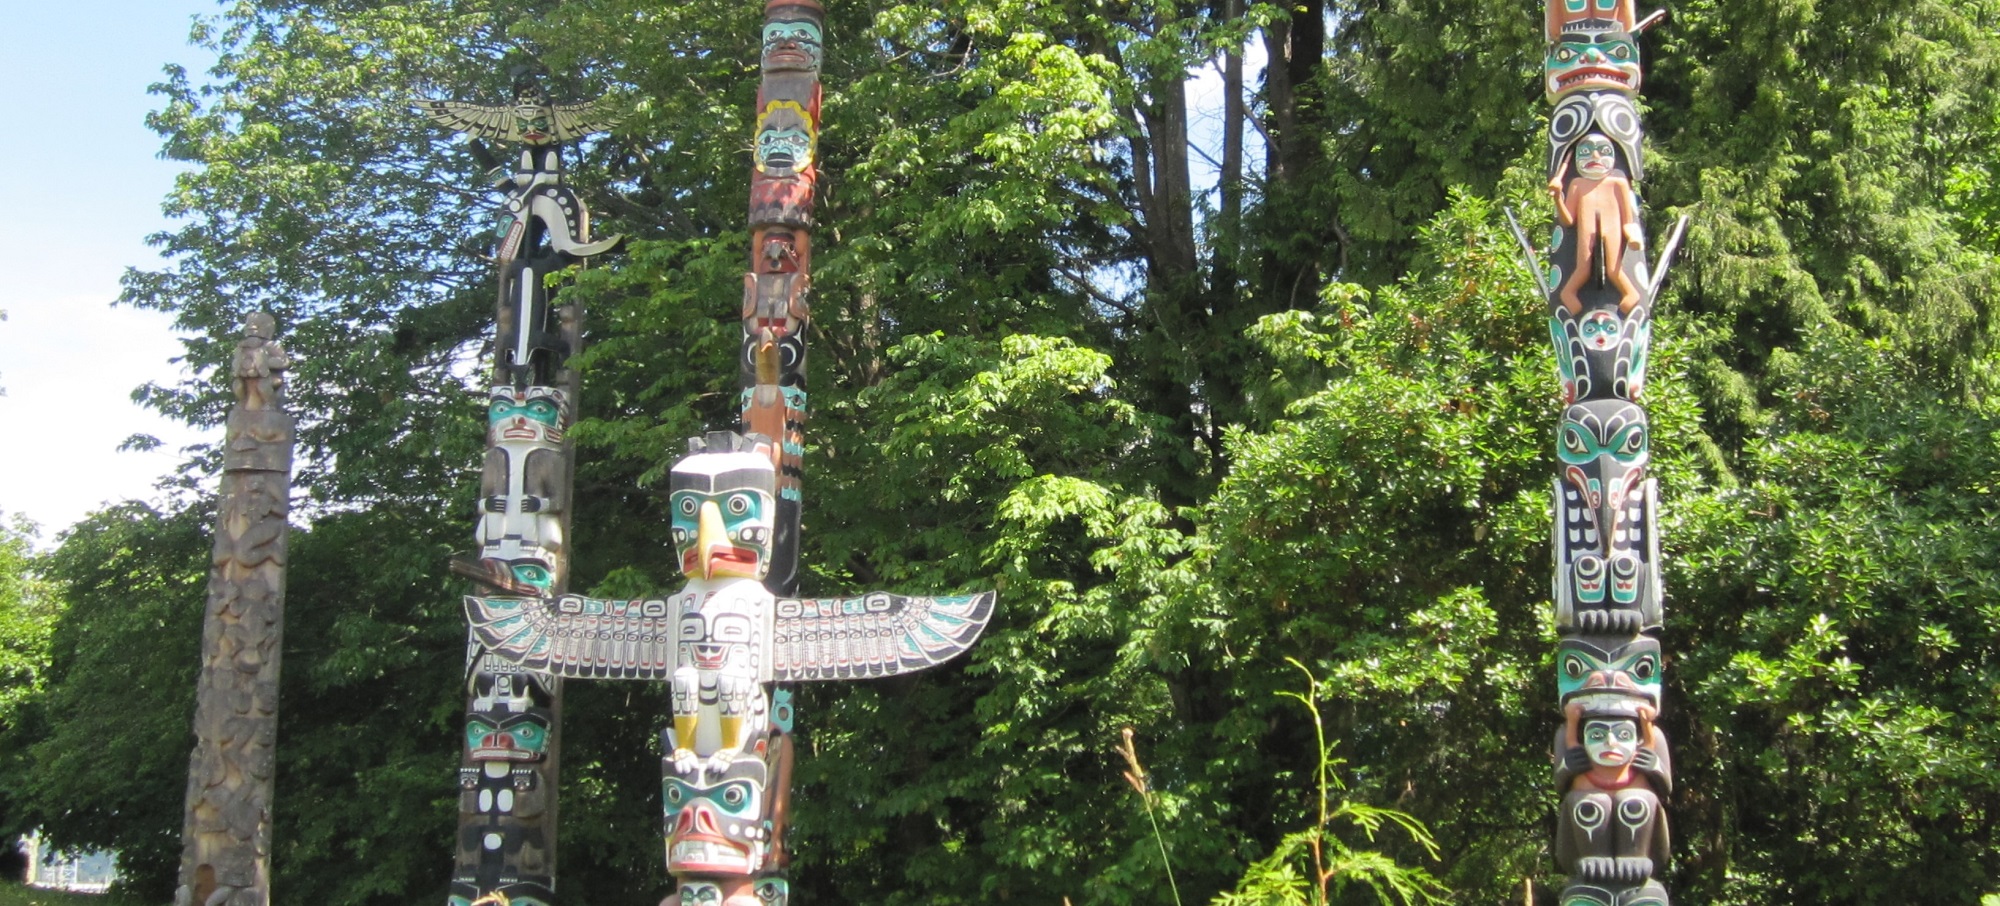 Totems in Stanley Park, Vancouver